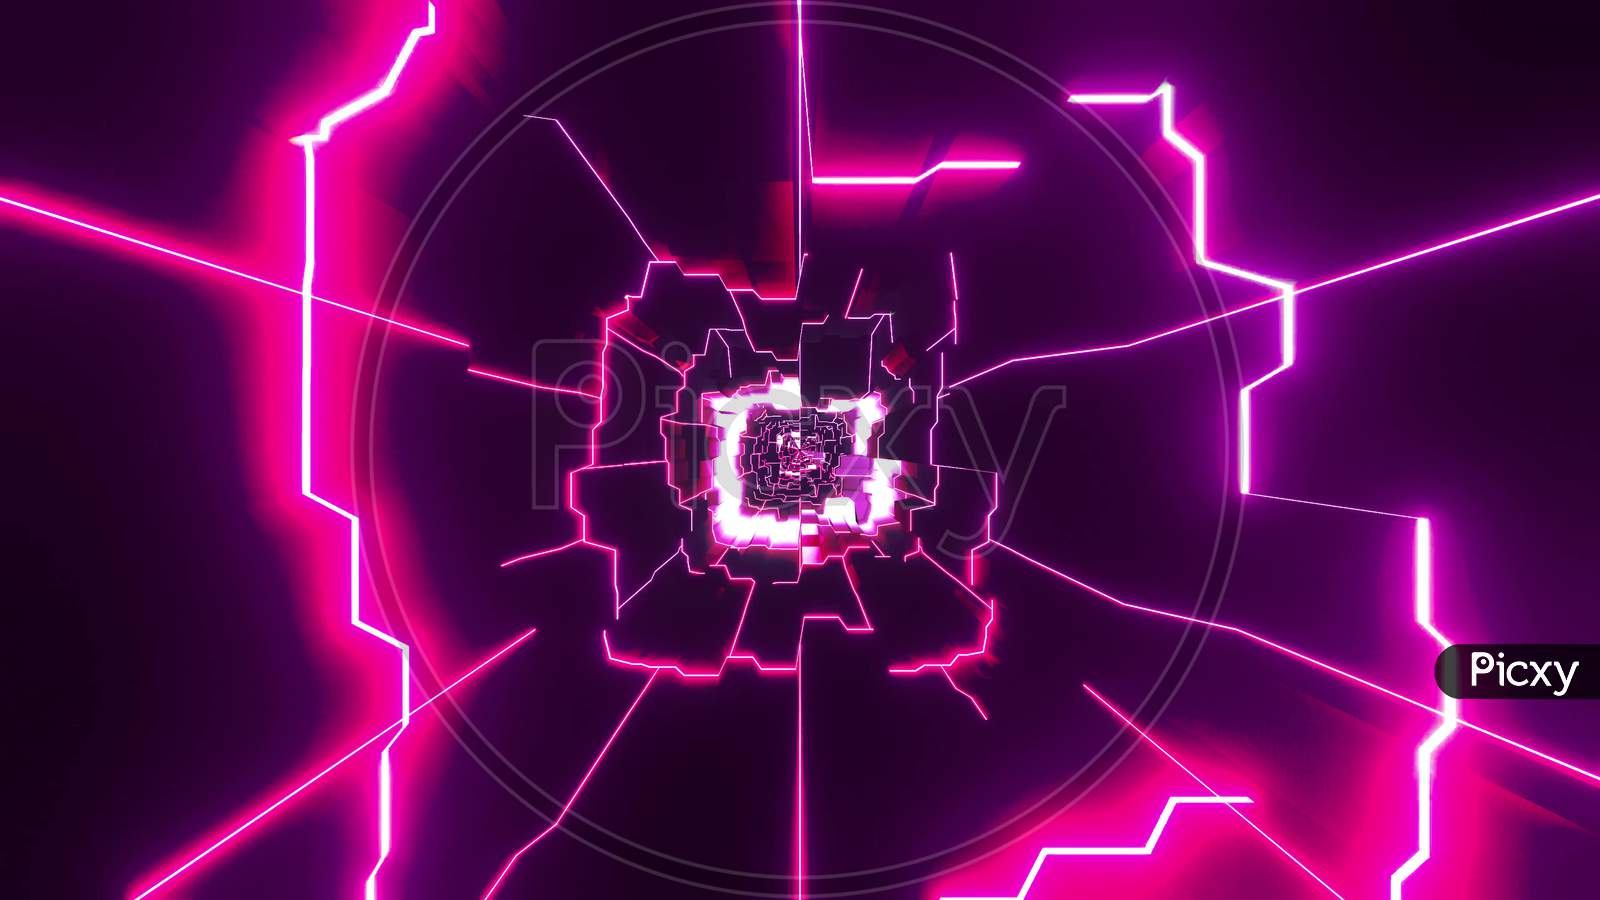 Black Sci-Fi Tunnel With Glowing Wireframe 3D Illustration Artwork Design Background Wallpaper